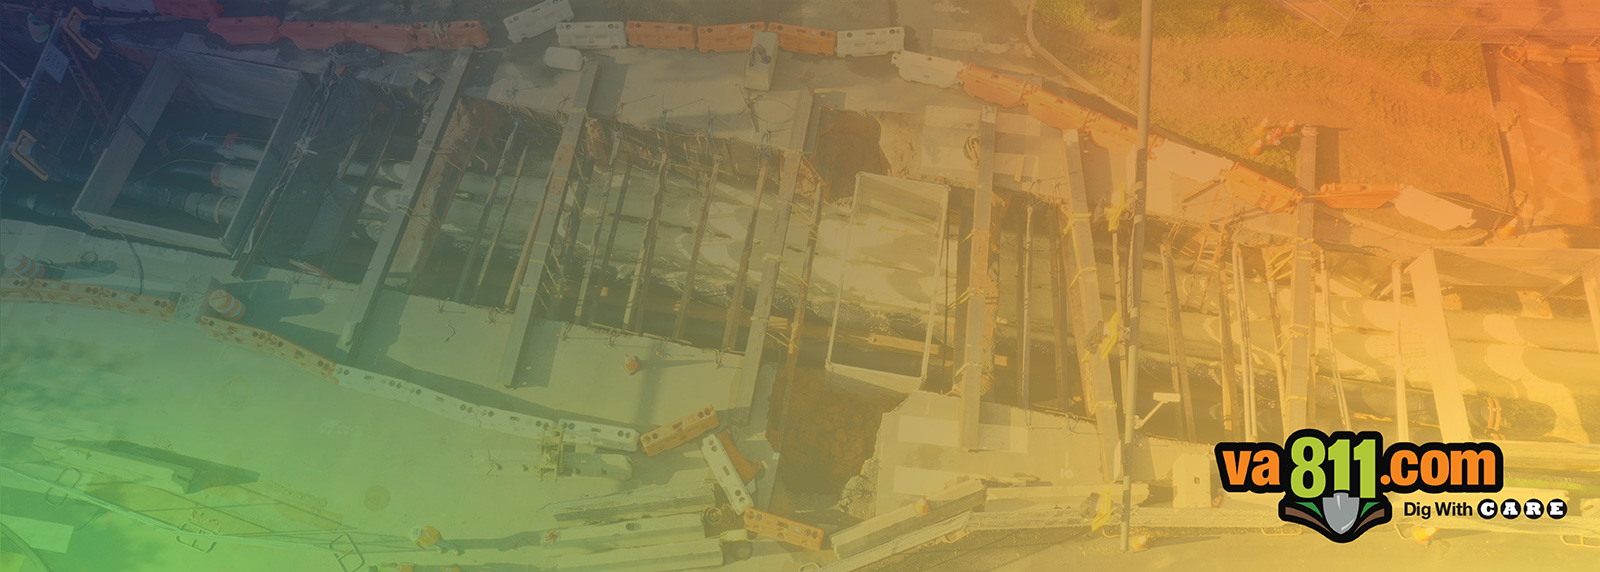 Aerial view of an active construction site with color overlays of blue, green and orange fading into one another